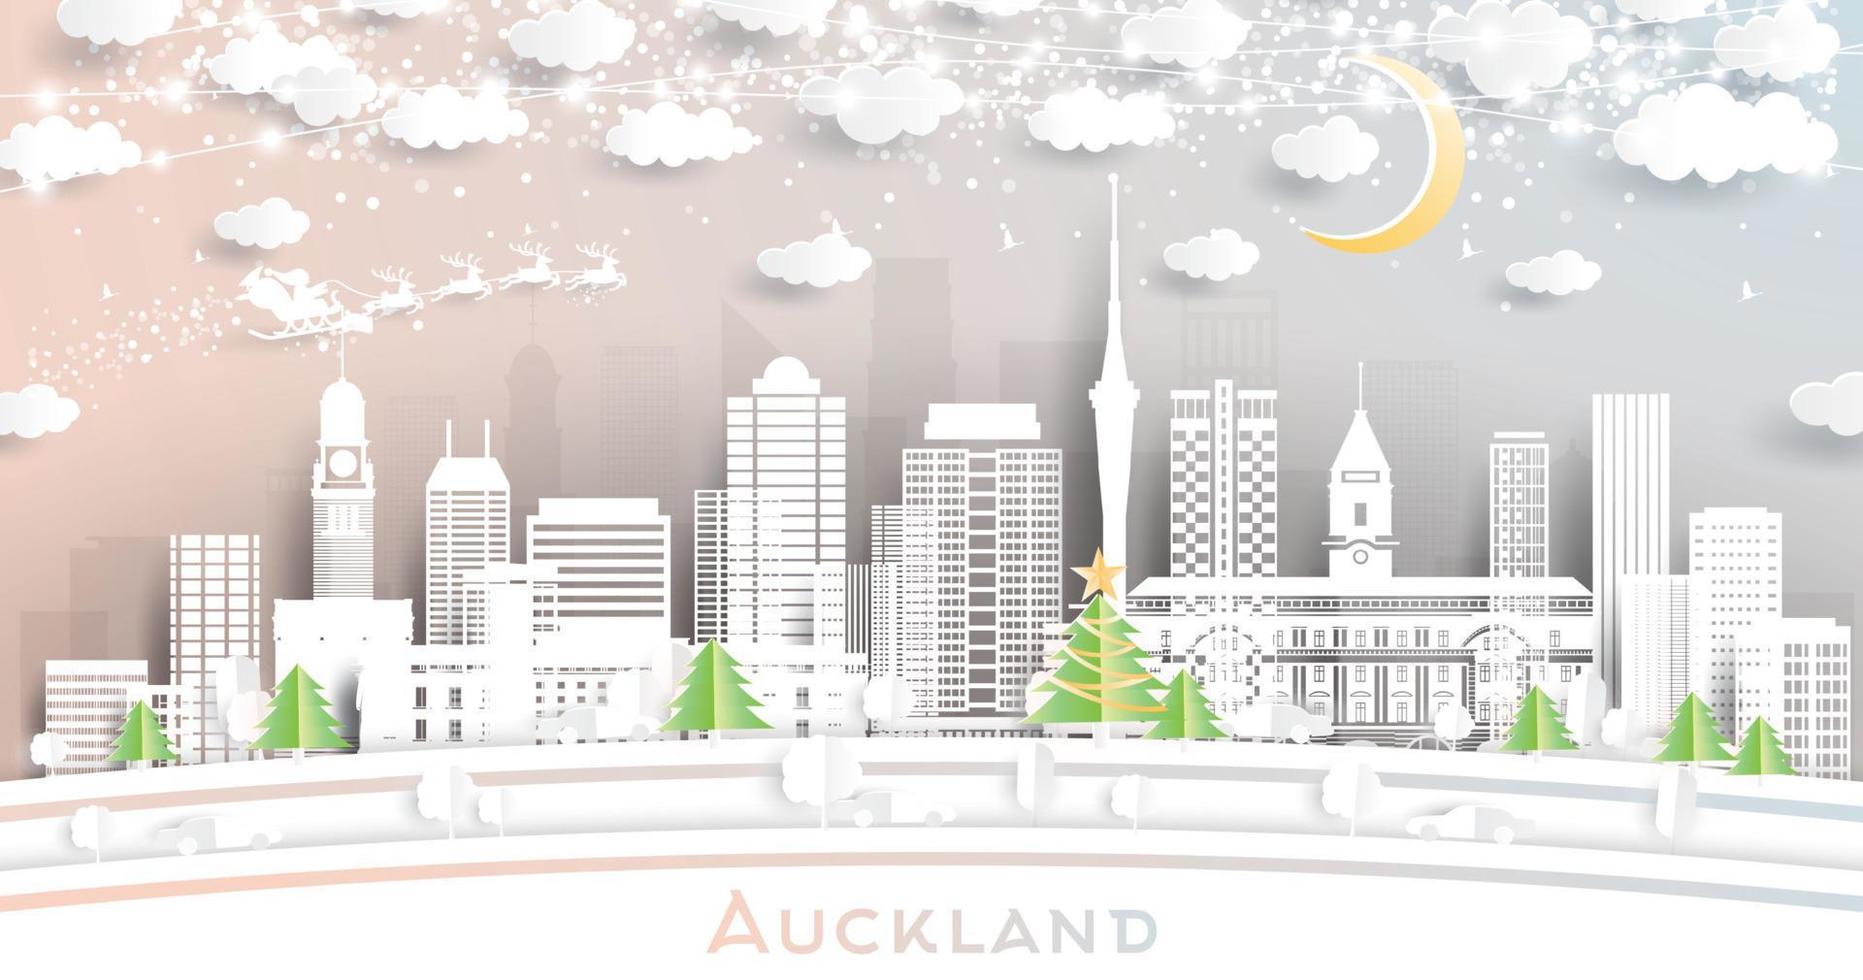 Auckland New Zealand City Skyline in Paper Cut Style with Snowflakes, Moon and Neon Garland. vector